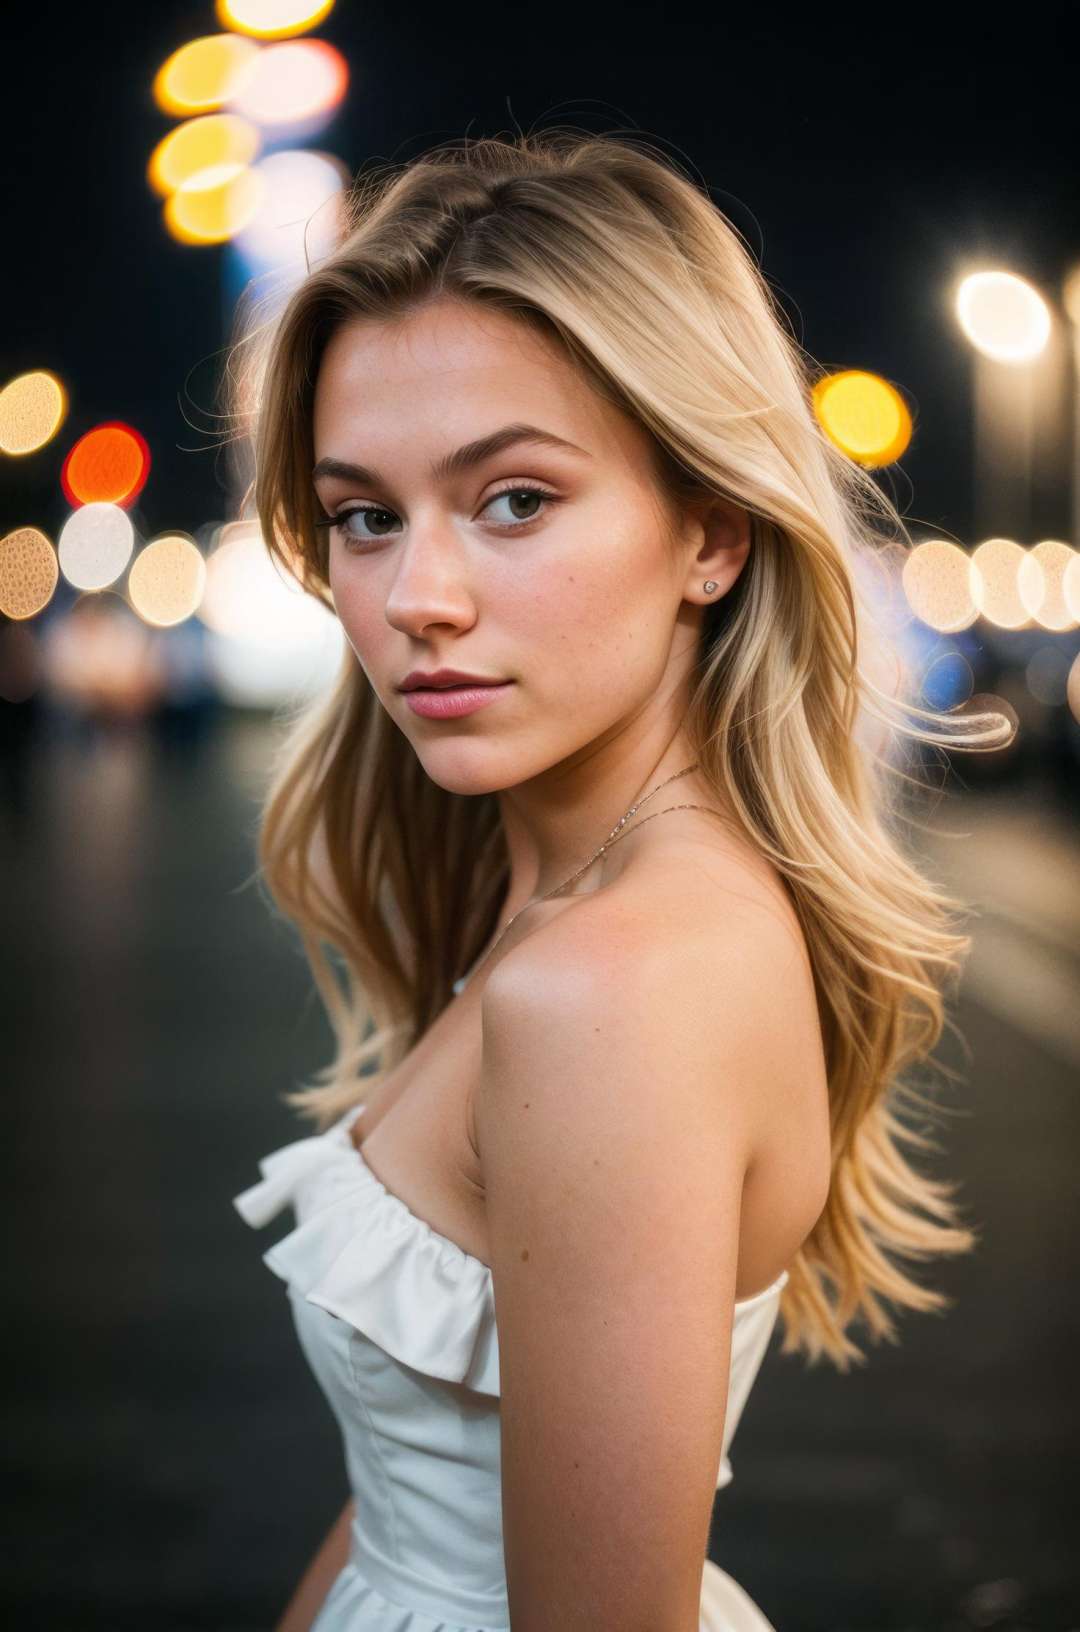 instagram photo, closeup face photo of  a young dutch woman in dress, CySterre_V1, beautiful face, makeup, night city street, bokeh, motion blur 